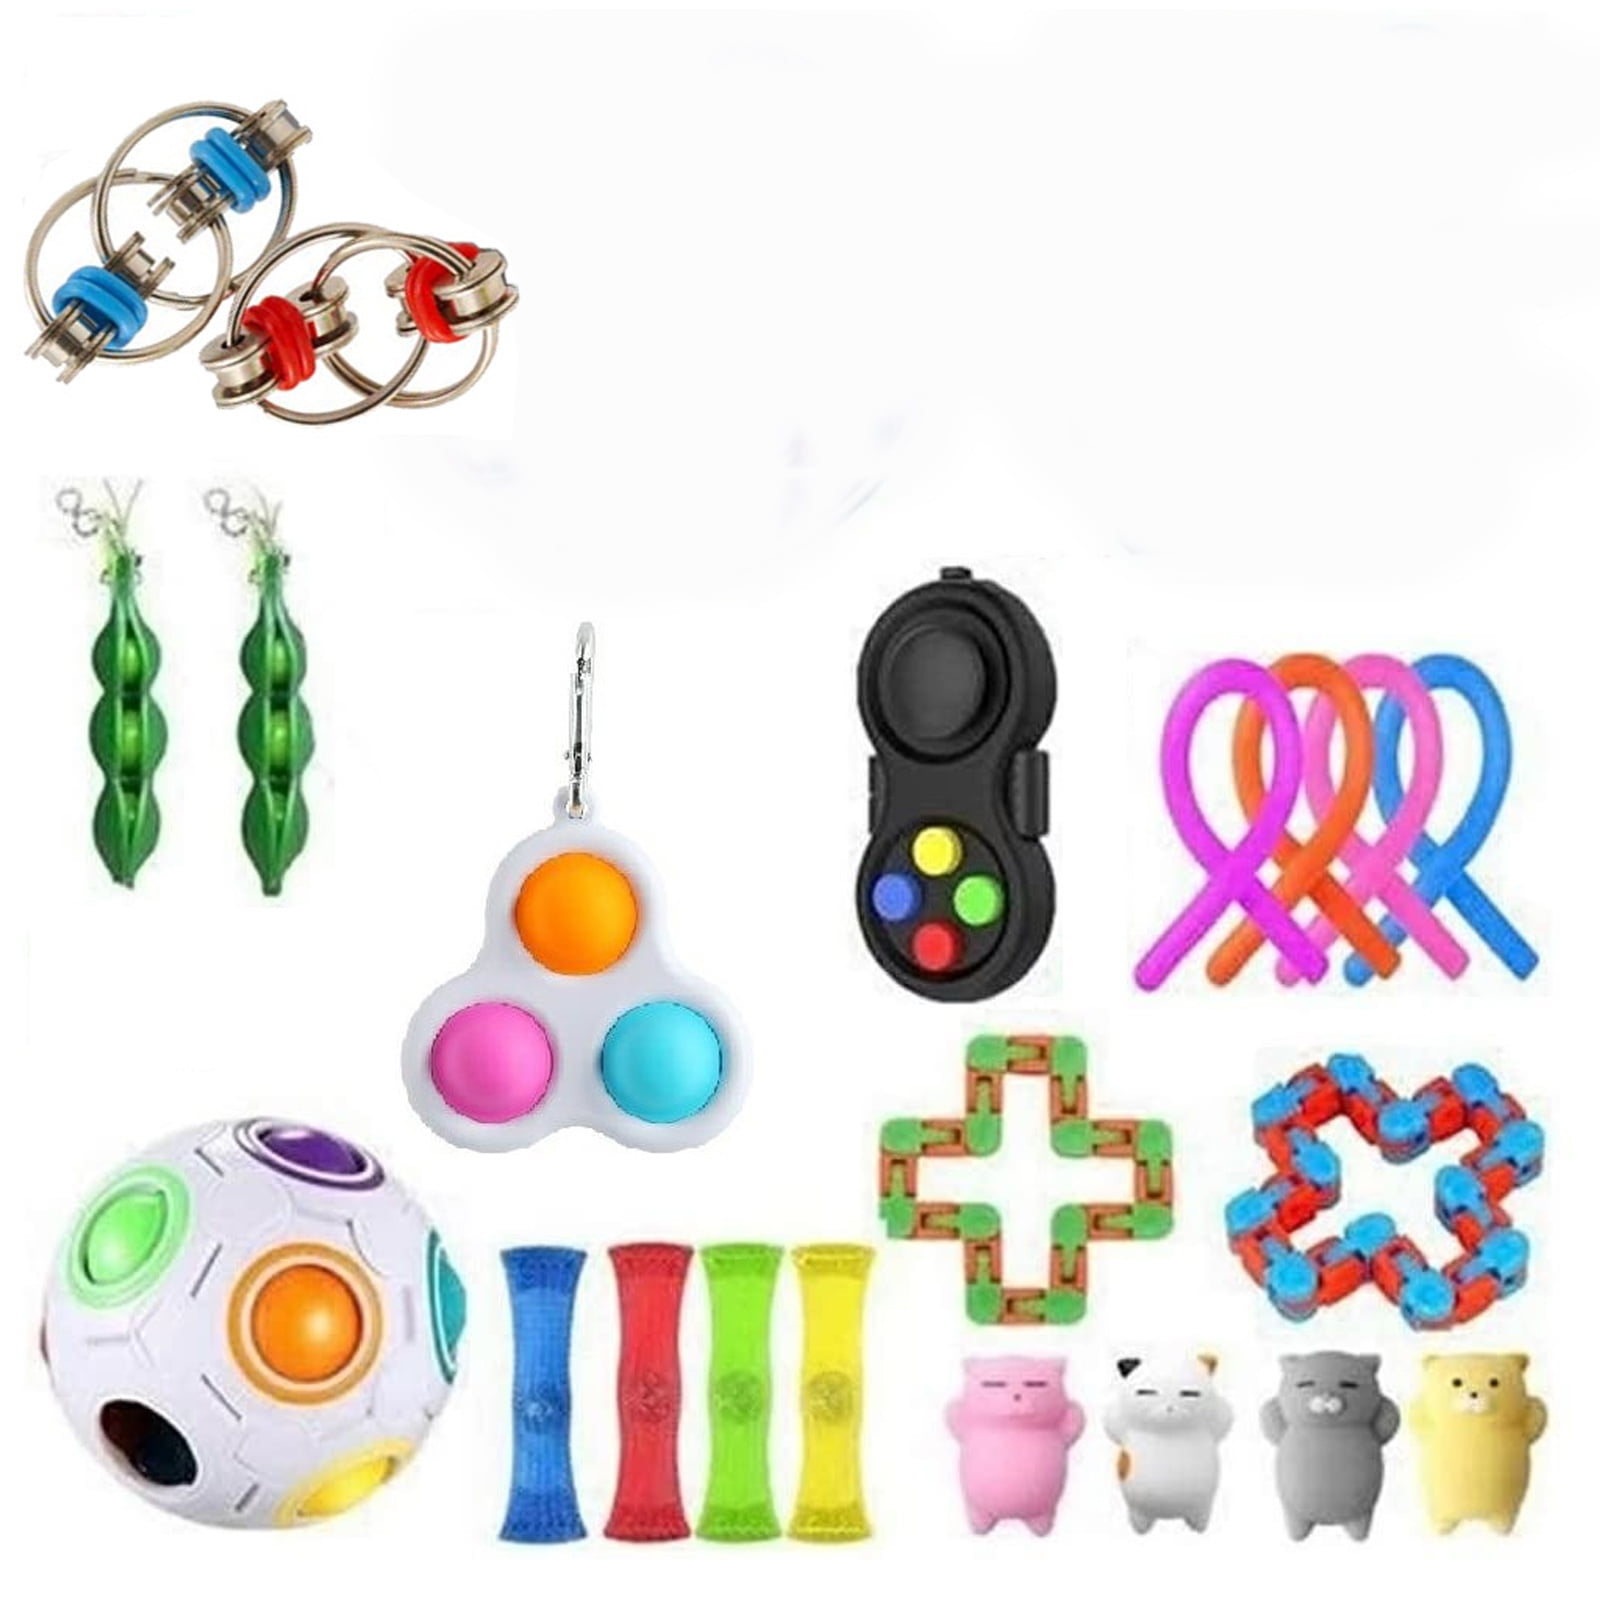 Details about   Fidget Toys Set Sensory Toy 21 Pack For ADHD Stress Relief and Anti-Anxiety Gift 